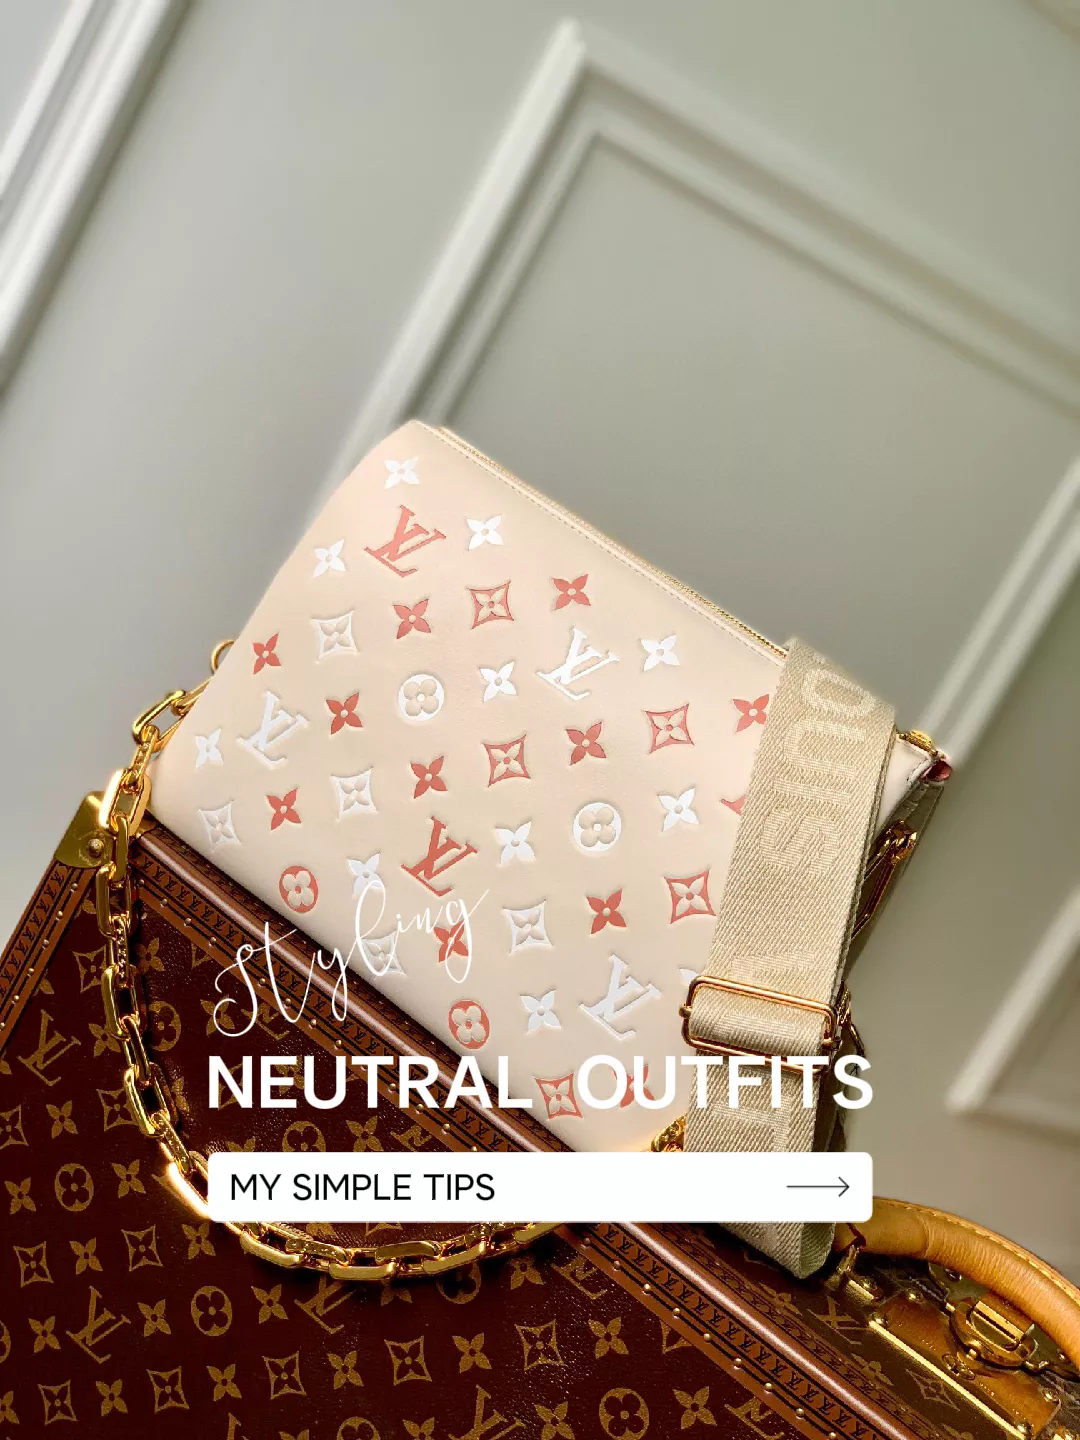 Product Review: LV's New Pochette Coussin Bag, Gallery posted by Liliana